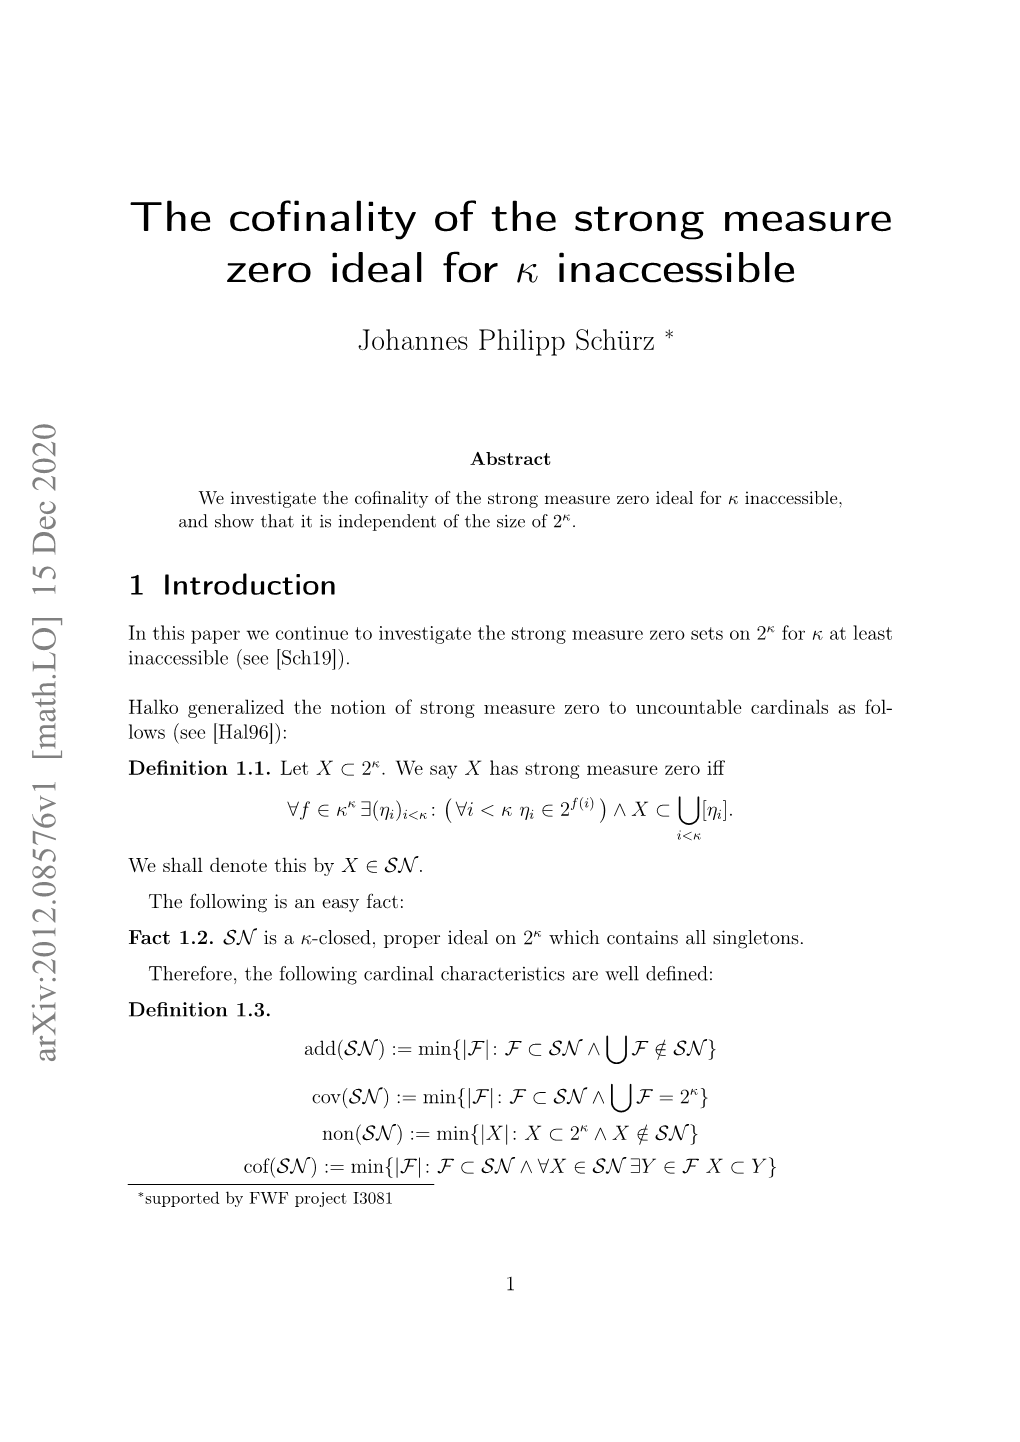 The Cofinality of the Strong Measure Zero Ideal for Κ Inaccessible